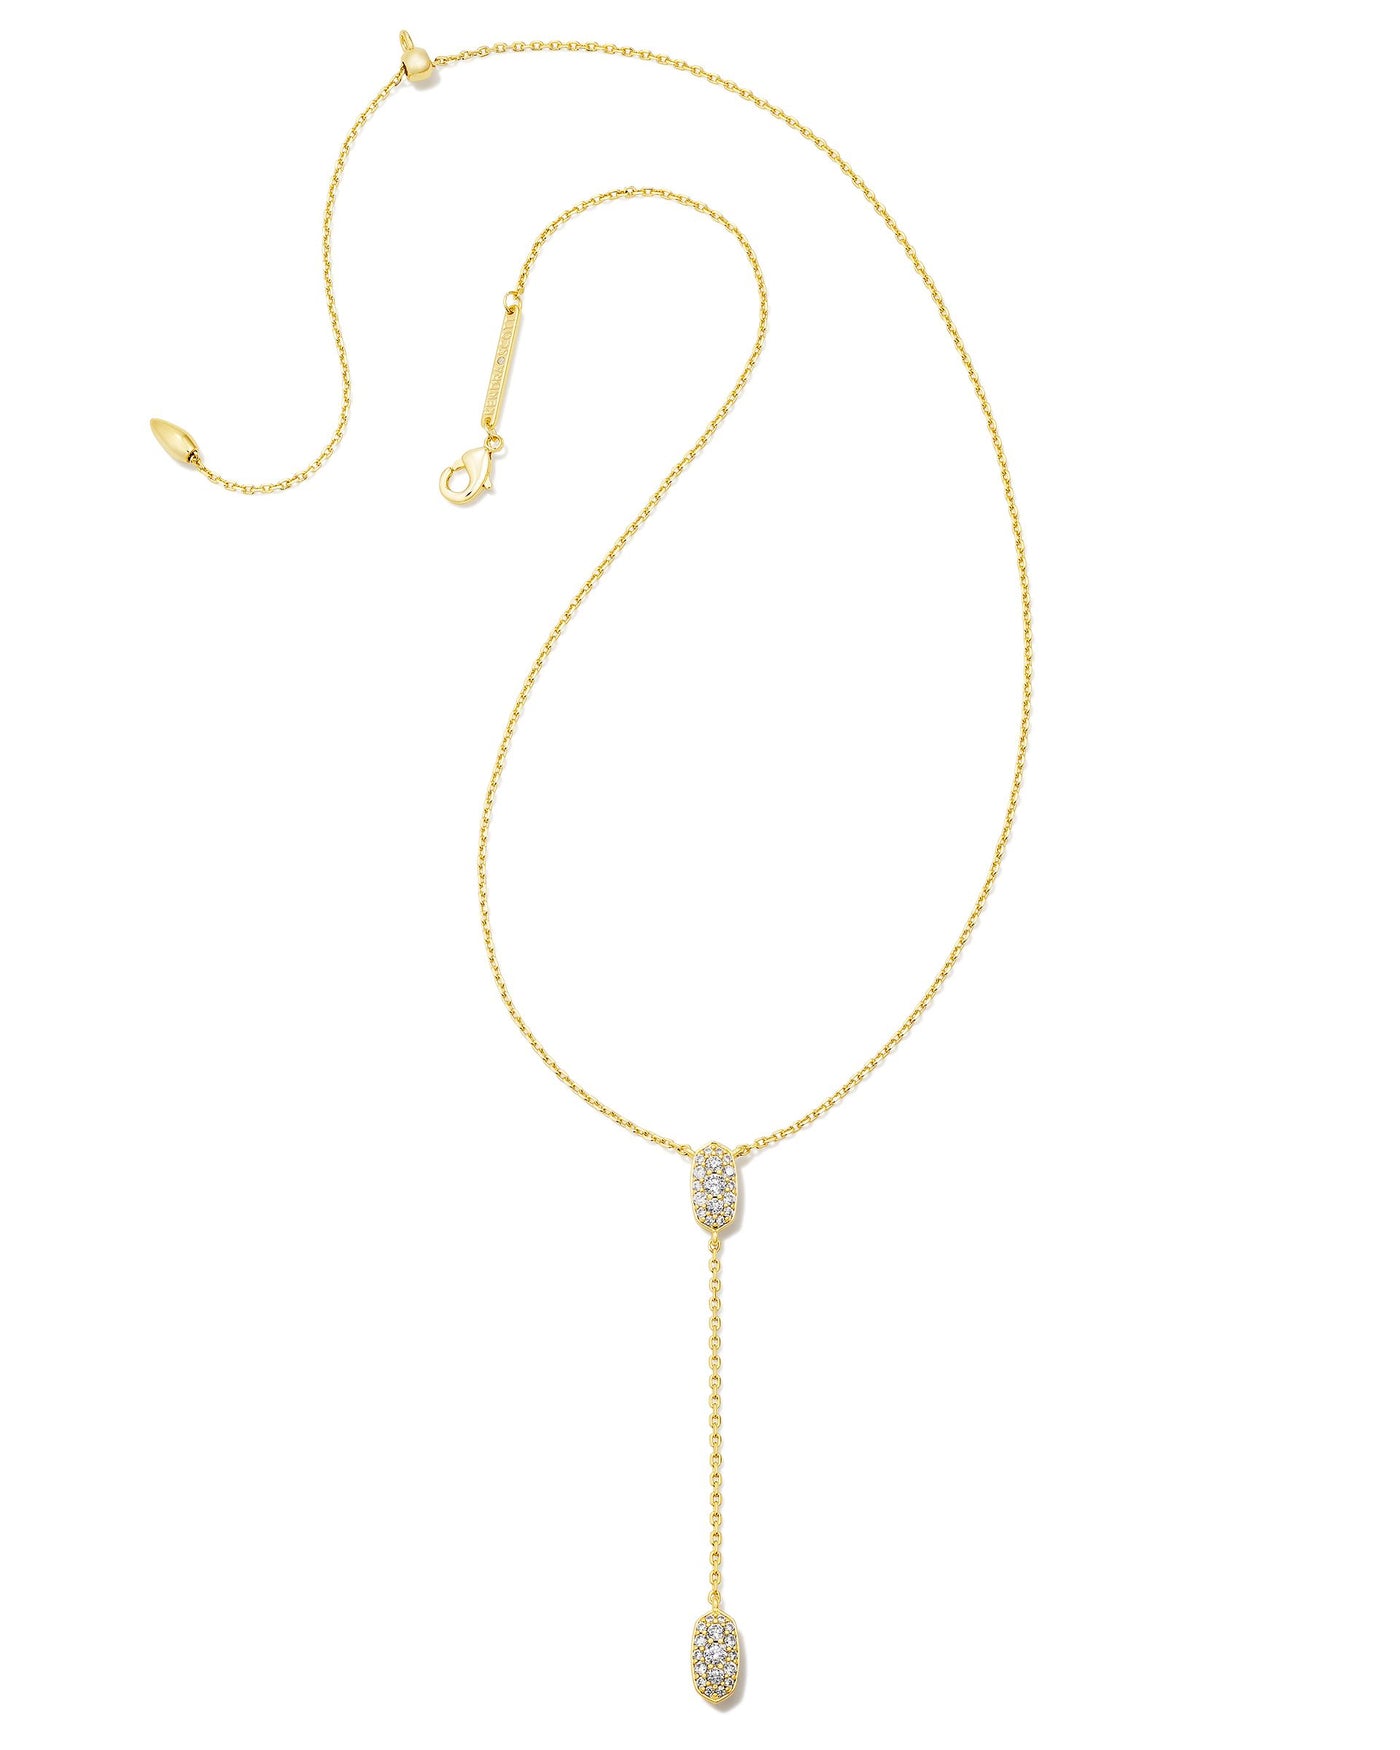 Kendra Scott Grayson Y Necklace White Crystal-Necklaces-Kendra Scott-Market Street Nest, Fashionable Clothing, Shoes and Home Décor Located in Mabank, TX